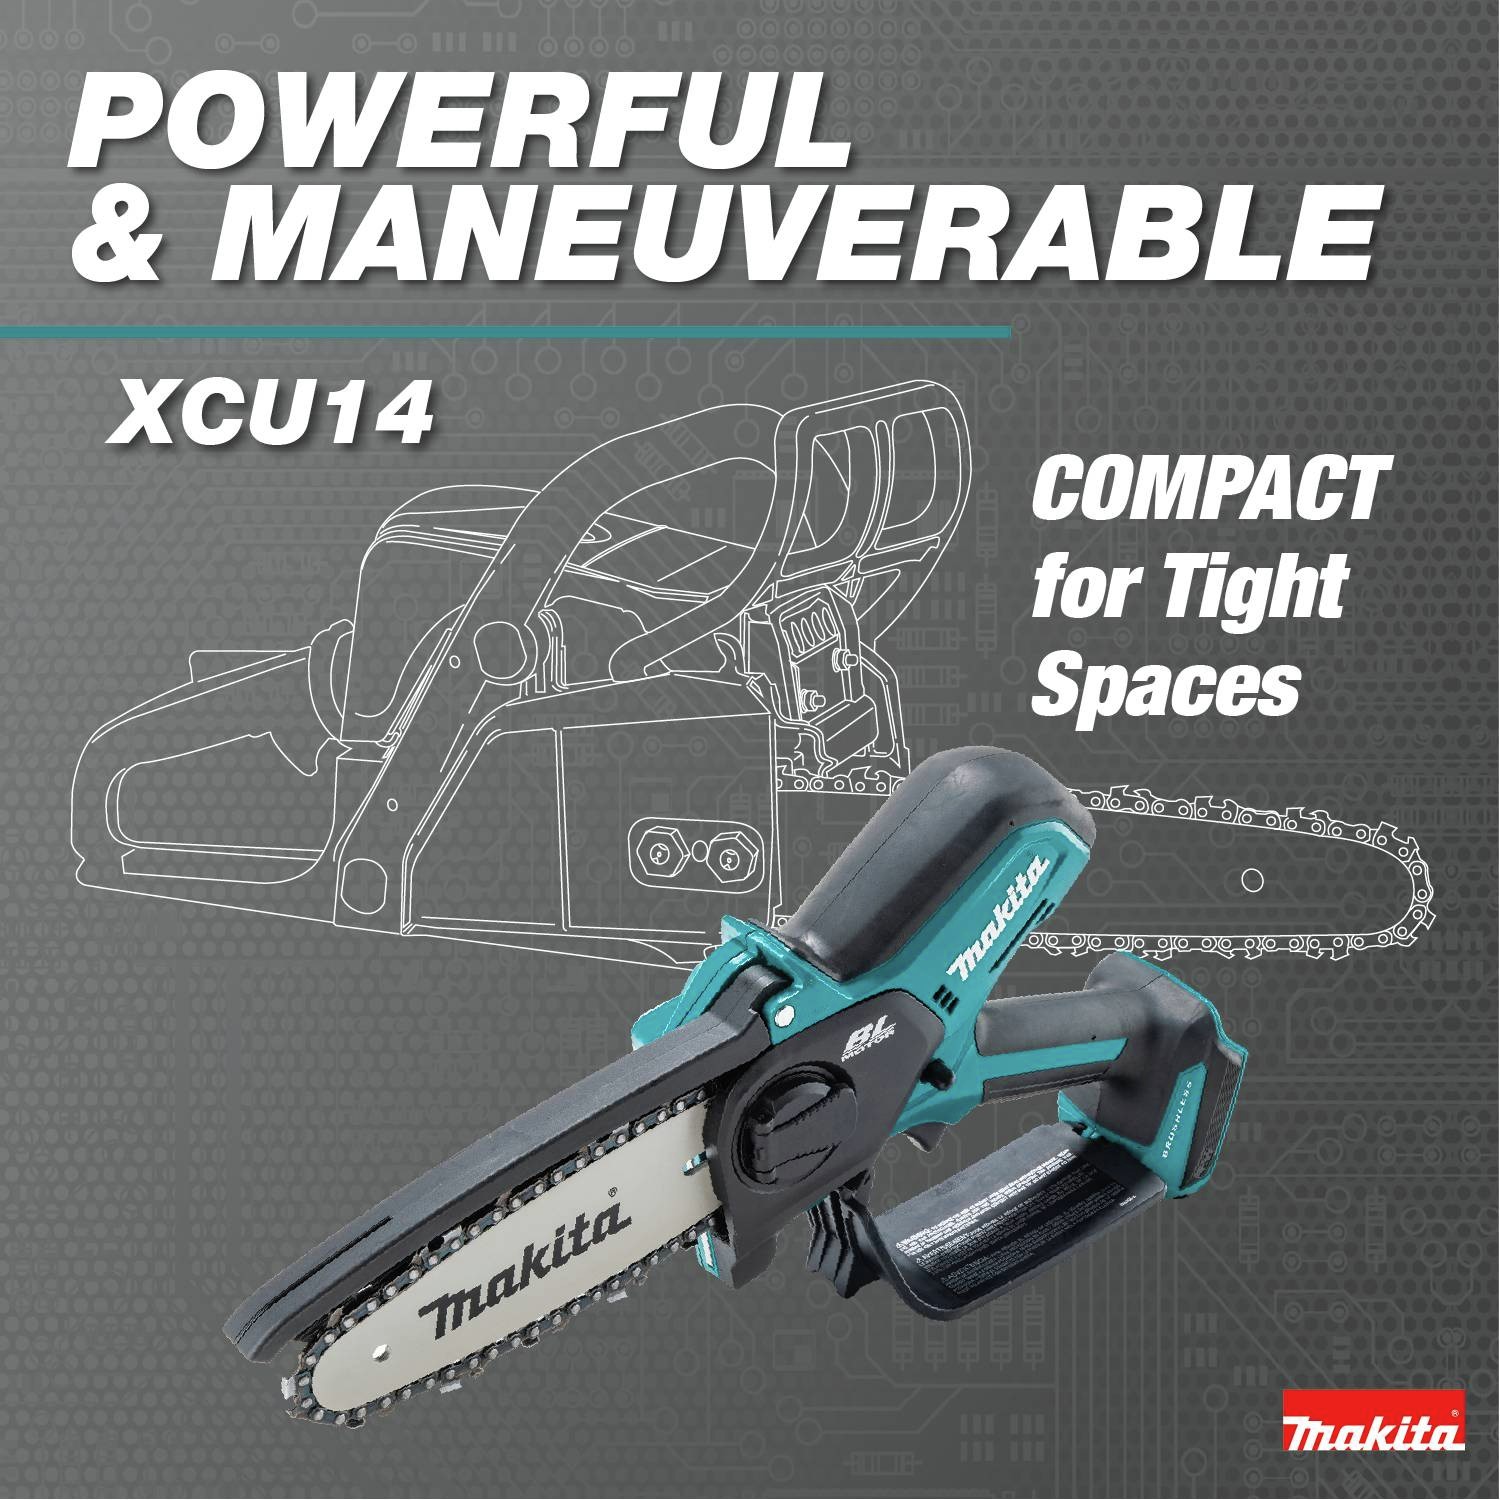 Powerful and Maneuverable: Compact for tight spaces